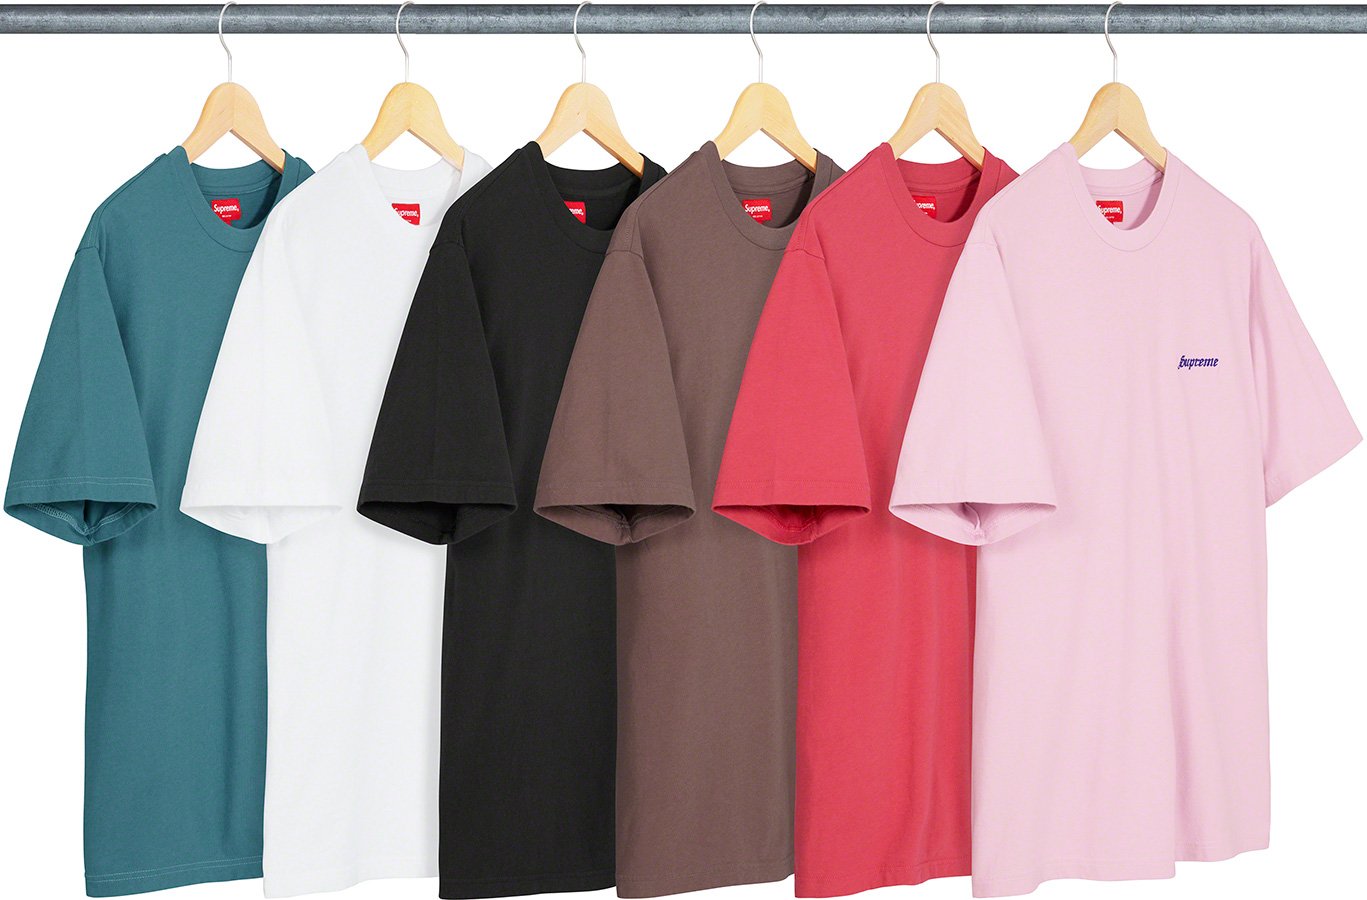 Washed S S Tee - fall winter 2020 - Supreme